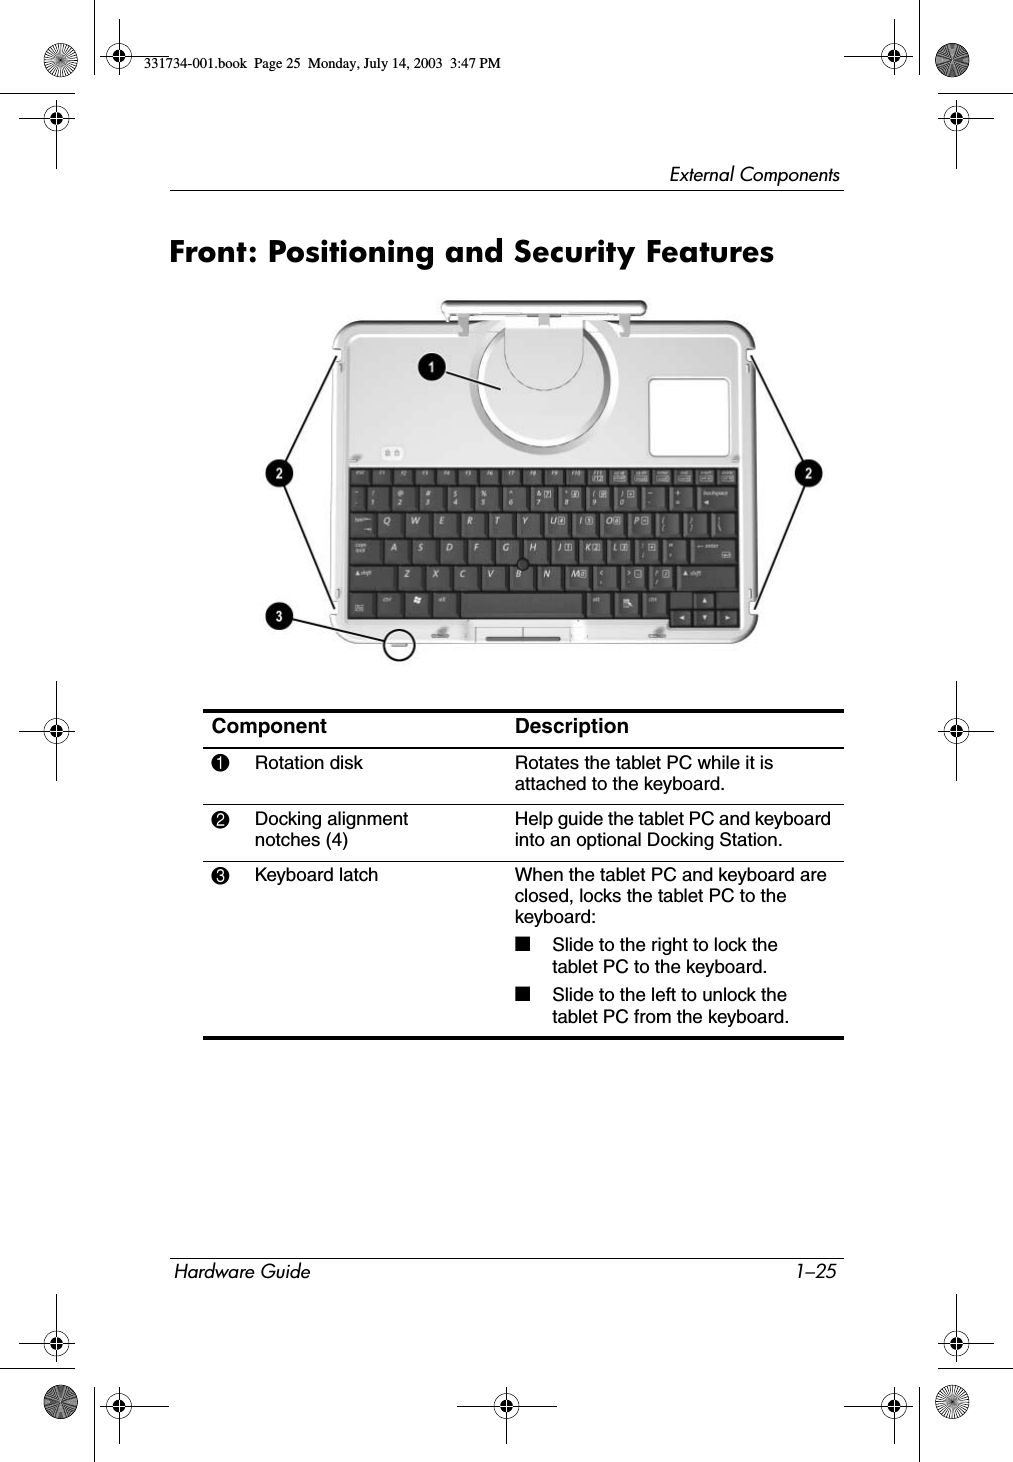 External ComponentsHardware Guide 1–25Front: Positioning and Security FeaturesComponent Description1Rotation disk Rotates the tablet PC while it is attached to the keyboard.2Docking alignment notches (4) Help guide the tablet PC and keyboard into an optional Docking Station.3Keyboard latch When the tablet PC and keyboard are closed, locks the tablet PC to the keyboard:■Slide to the right to lock the tablet PC to the keyboard.■Slide to the left to unlock the tablet PC from the keyboard.331734-001.book  Page 25  Monday, July 14, 2003  3:47 PM